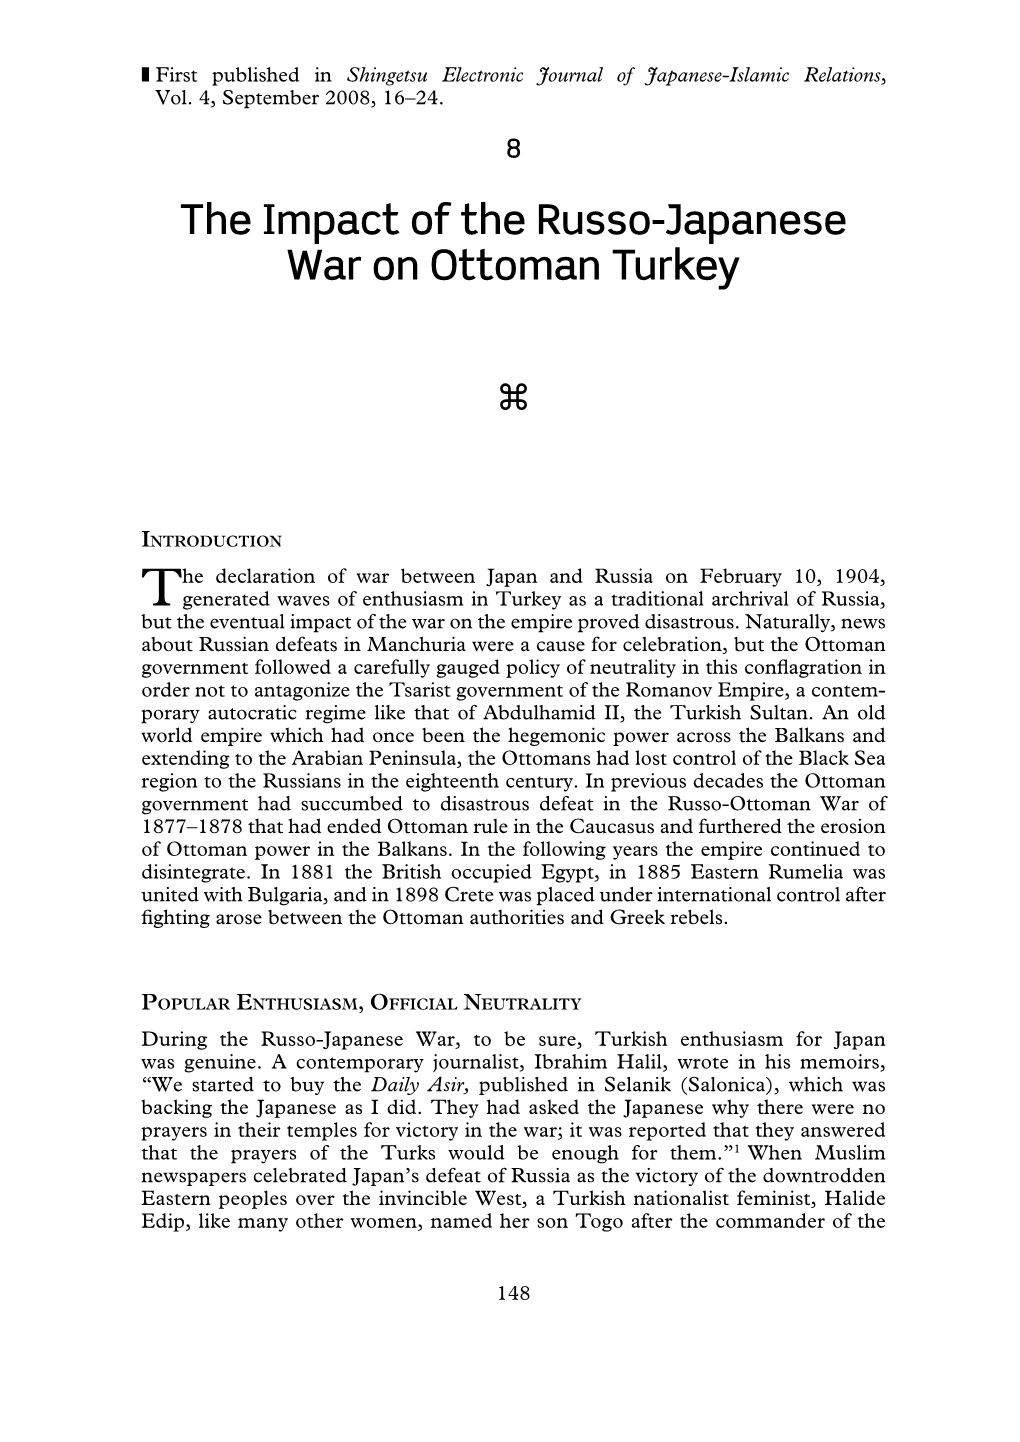 The Impact of the Russo-Japanese War on Ottoman Turkey